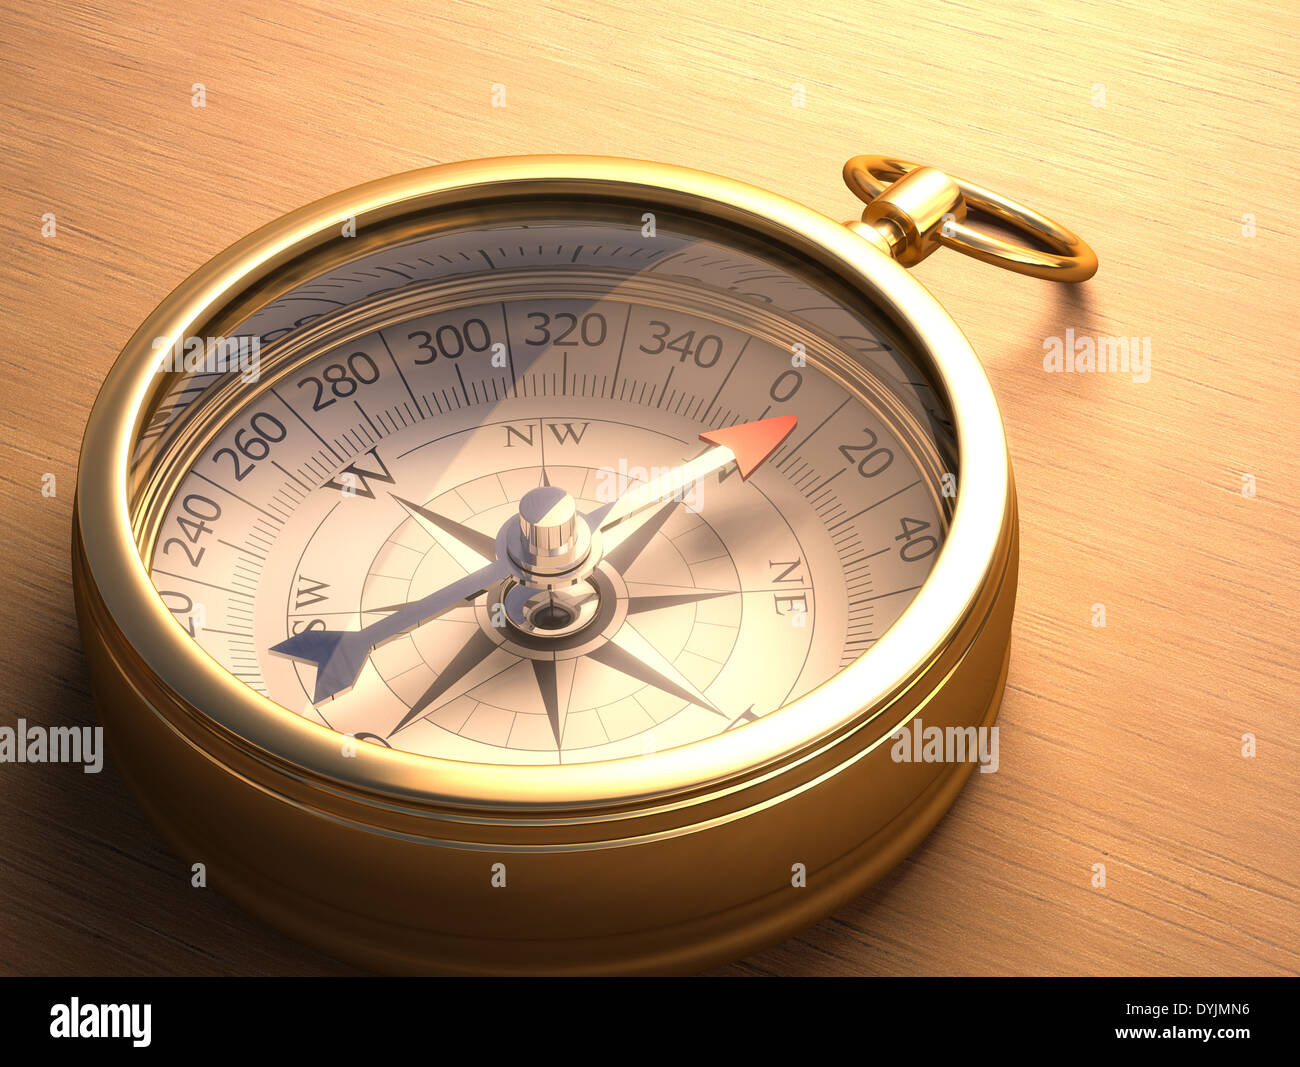 Compass on a wooden table with clipping path included. Stock Photo